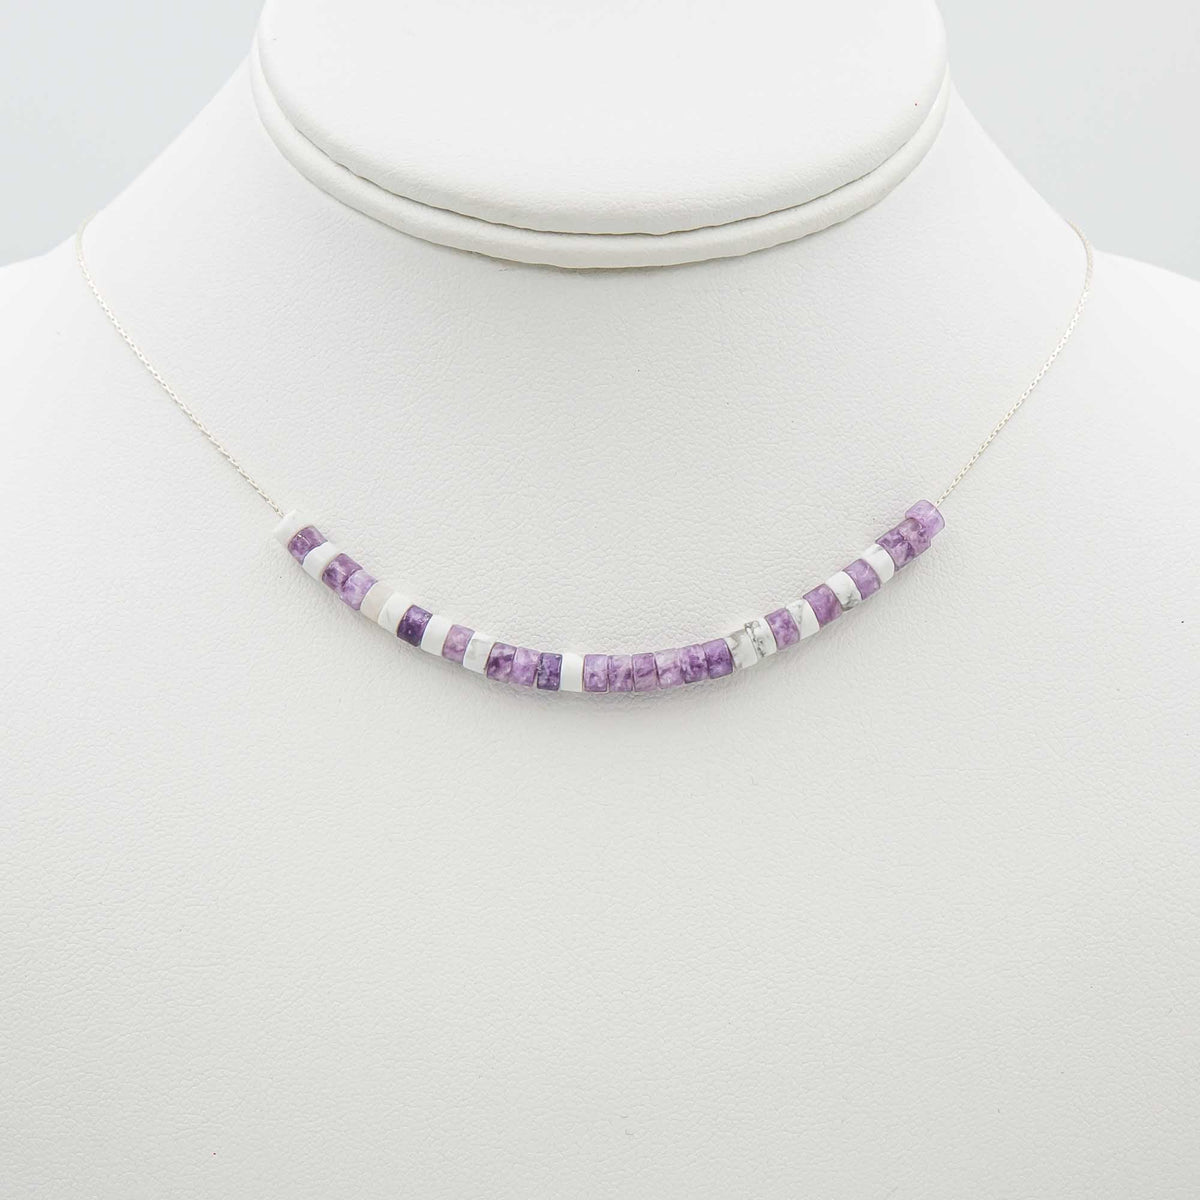 Earth Song Jewelry Custom Personalized CANCER SUCKS Morse Code Necklace in Sterling Silver and Lepidolite Natural Purple Stone for Women shown on the necklace bust